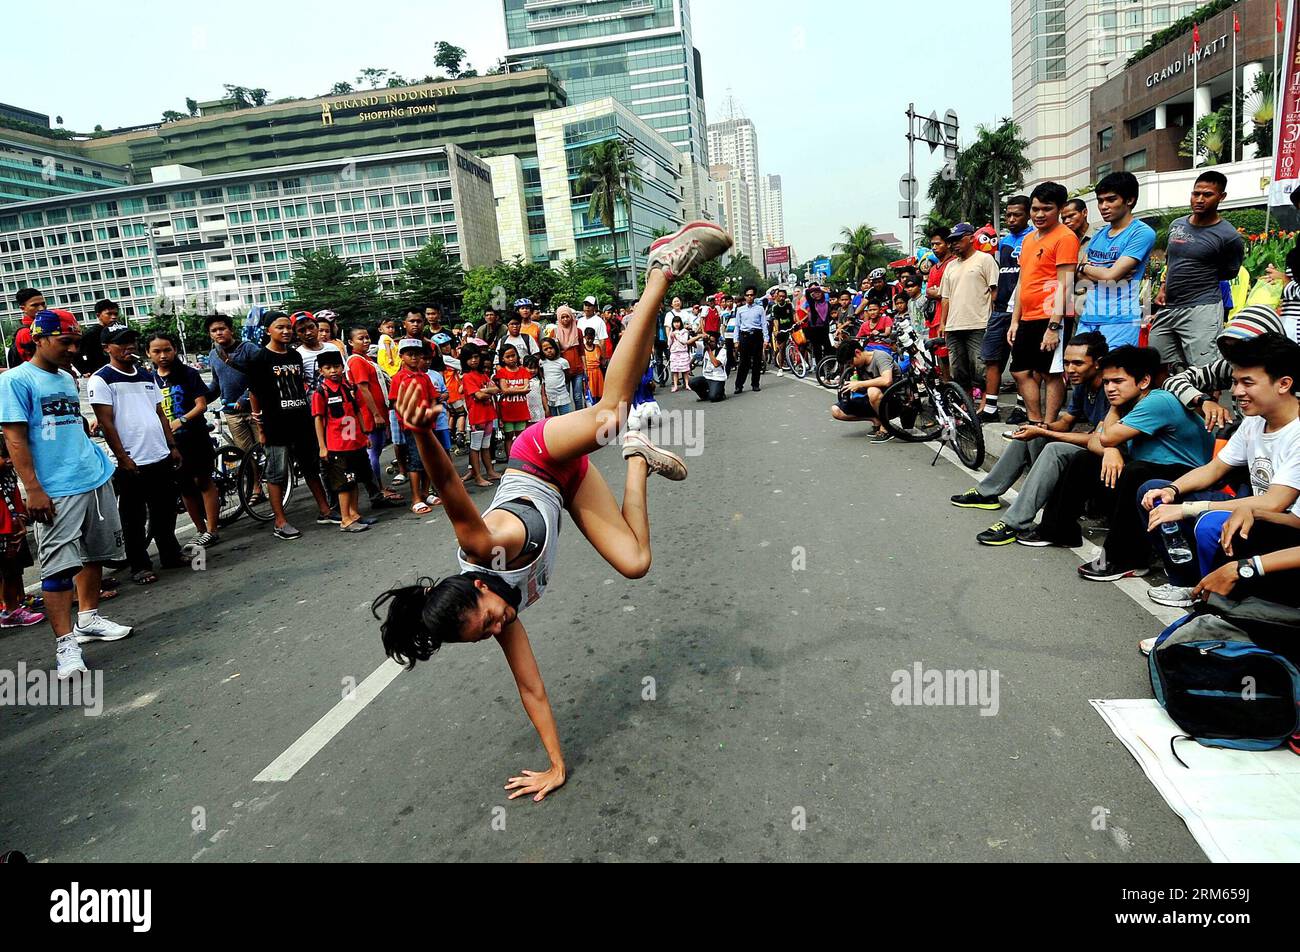 Bildnummer: 60806606  Datum: 08.12.2013  Copyright: imago/Xinhua     A woman from Indonesian Jumper community stages some parkour and free run skills during the car free day in Jakarta, Indonesia, Dec. 8, 2013. (Xinhua/Agung Kuncahya B.) INDONESIA-JAKARTA-CAR FREE DAY PUBLICATIONxNOTxINxCHN xcb x0x 2013 quer Stock Photo